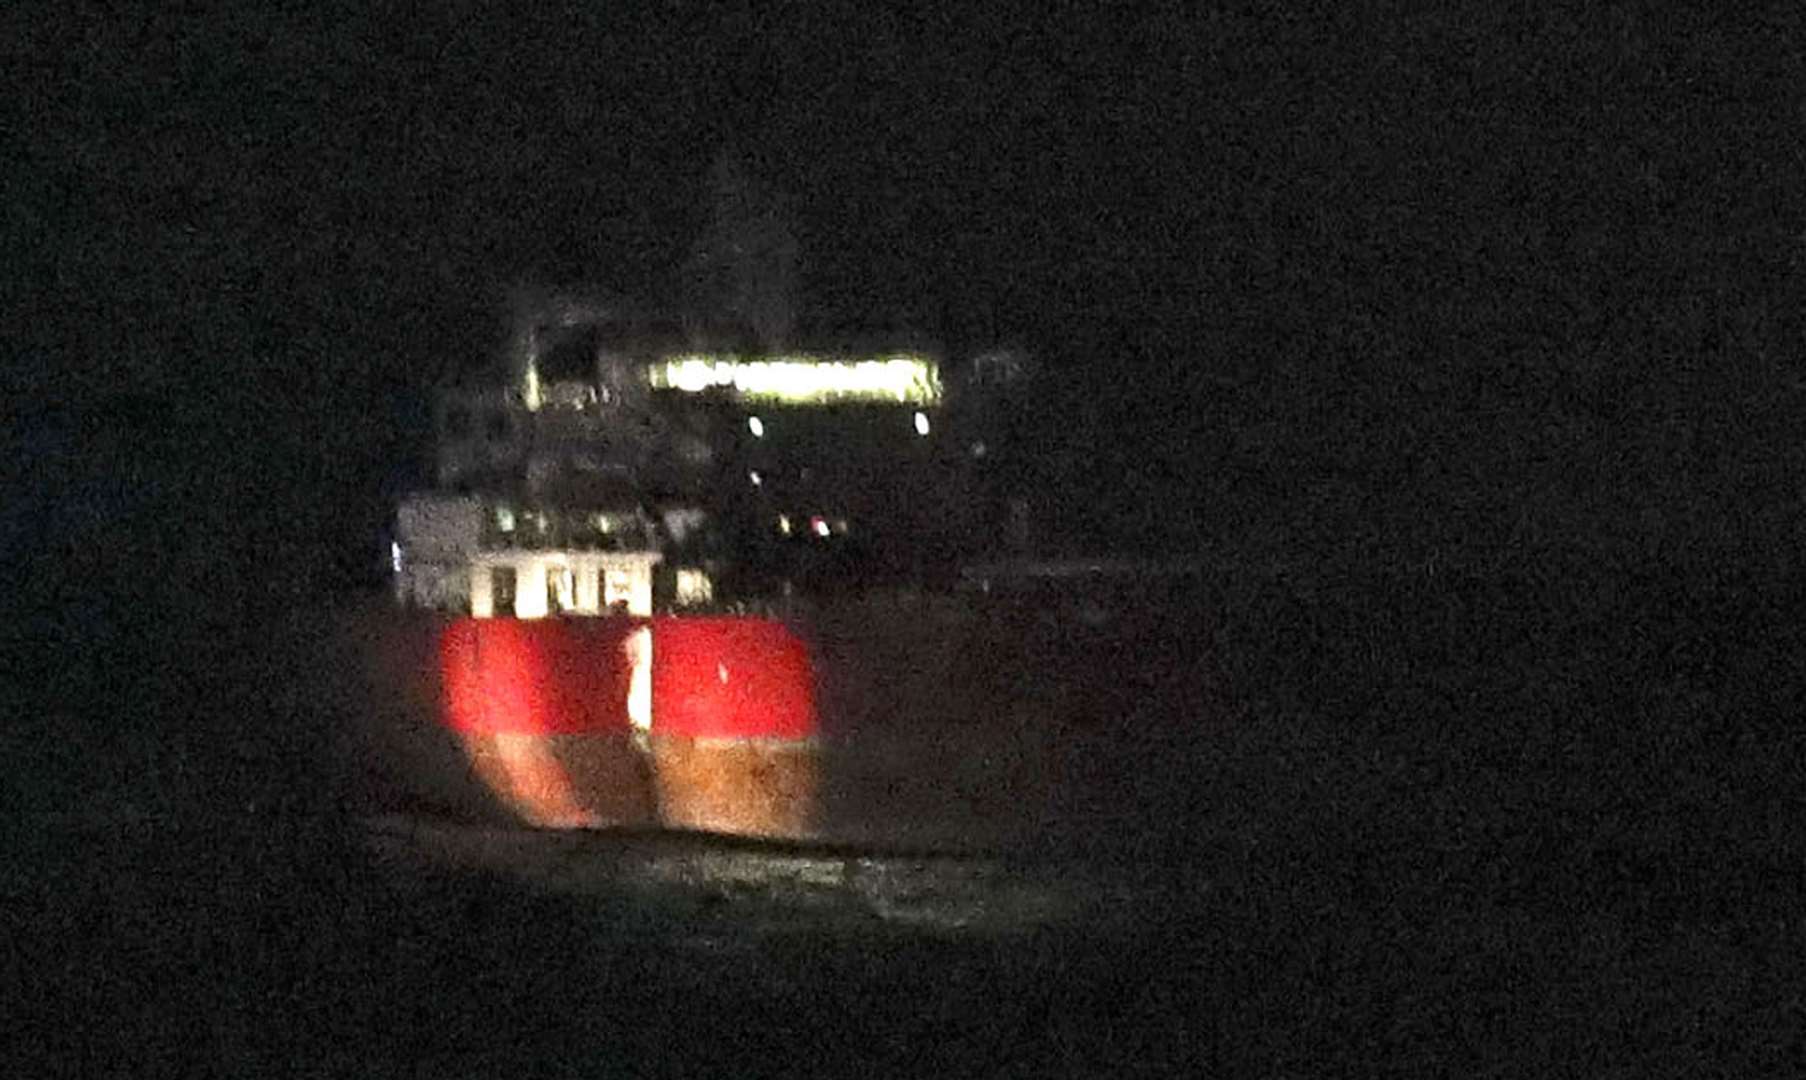 The Nave Andromeda oil tanker off the coast of the Isle of Wight on Sunday night (Steve Parsons/PA)